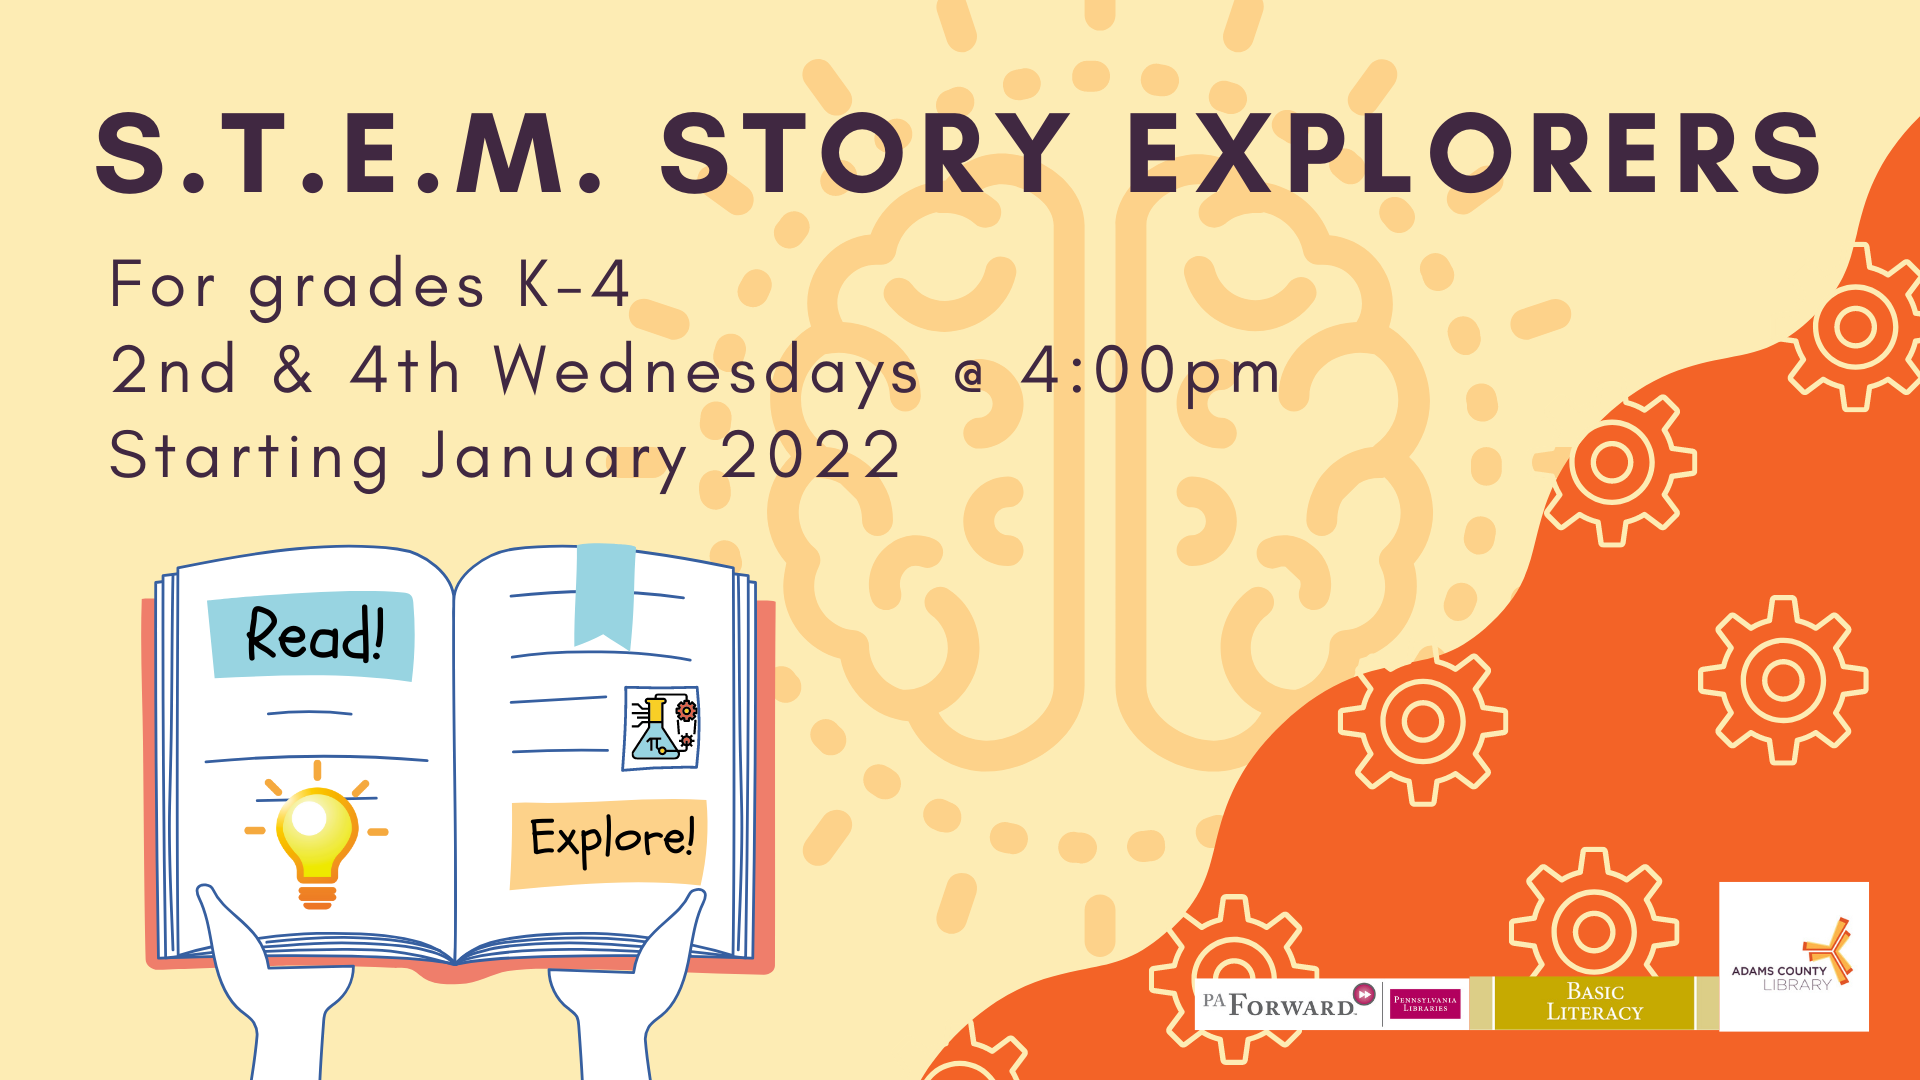 Join us the 2nd and 4th Wednesday of the month for STEM Story Explorers at 4:00pm!